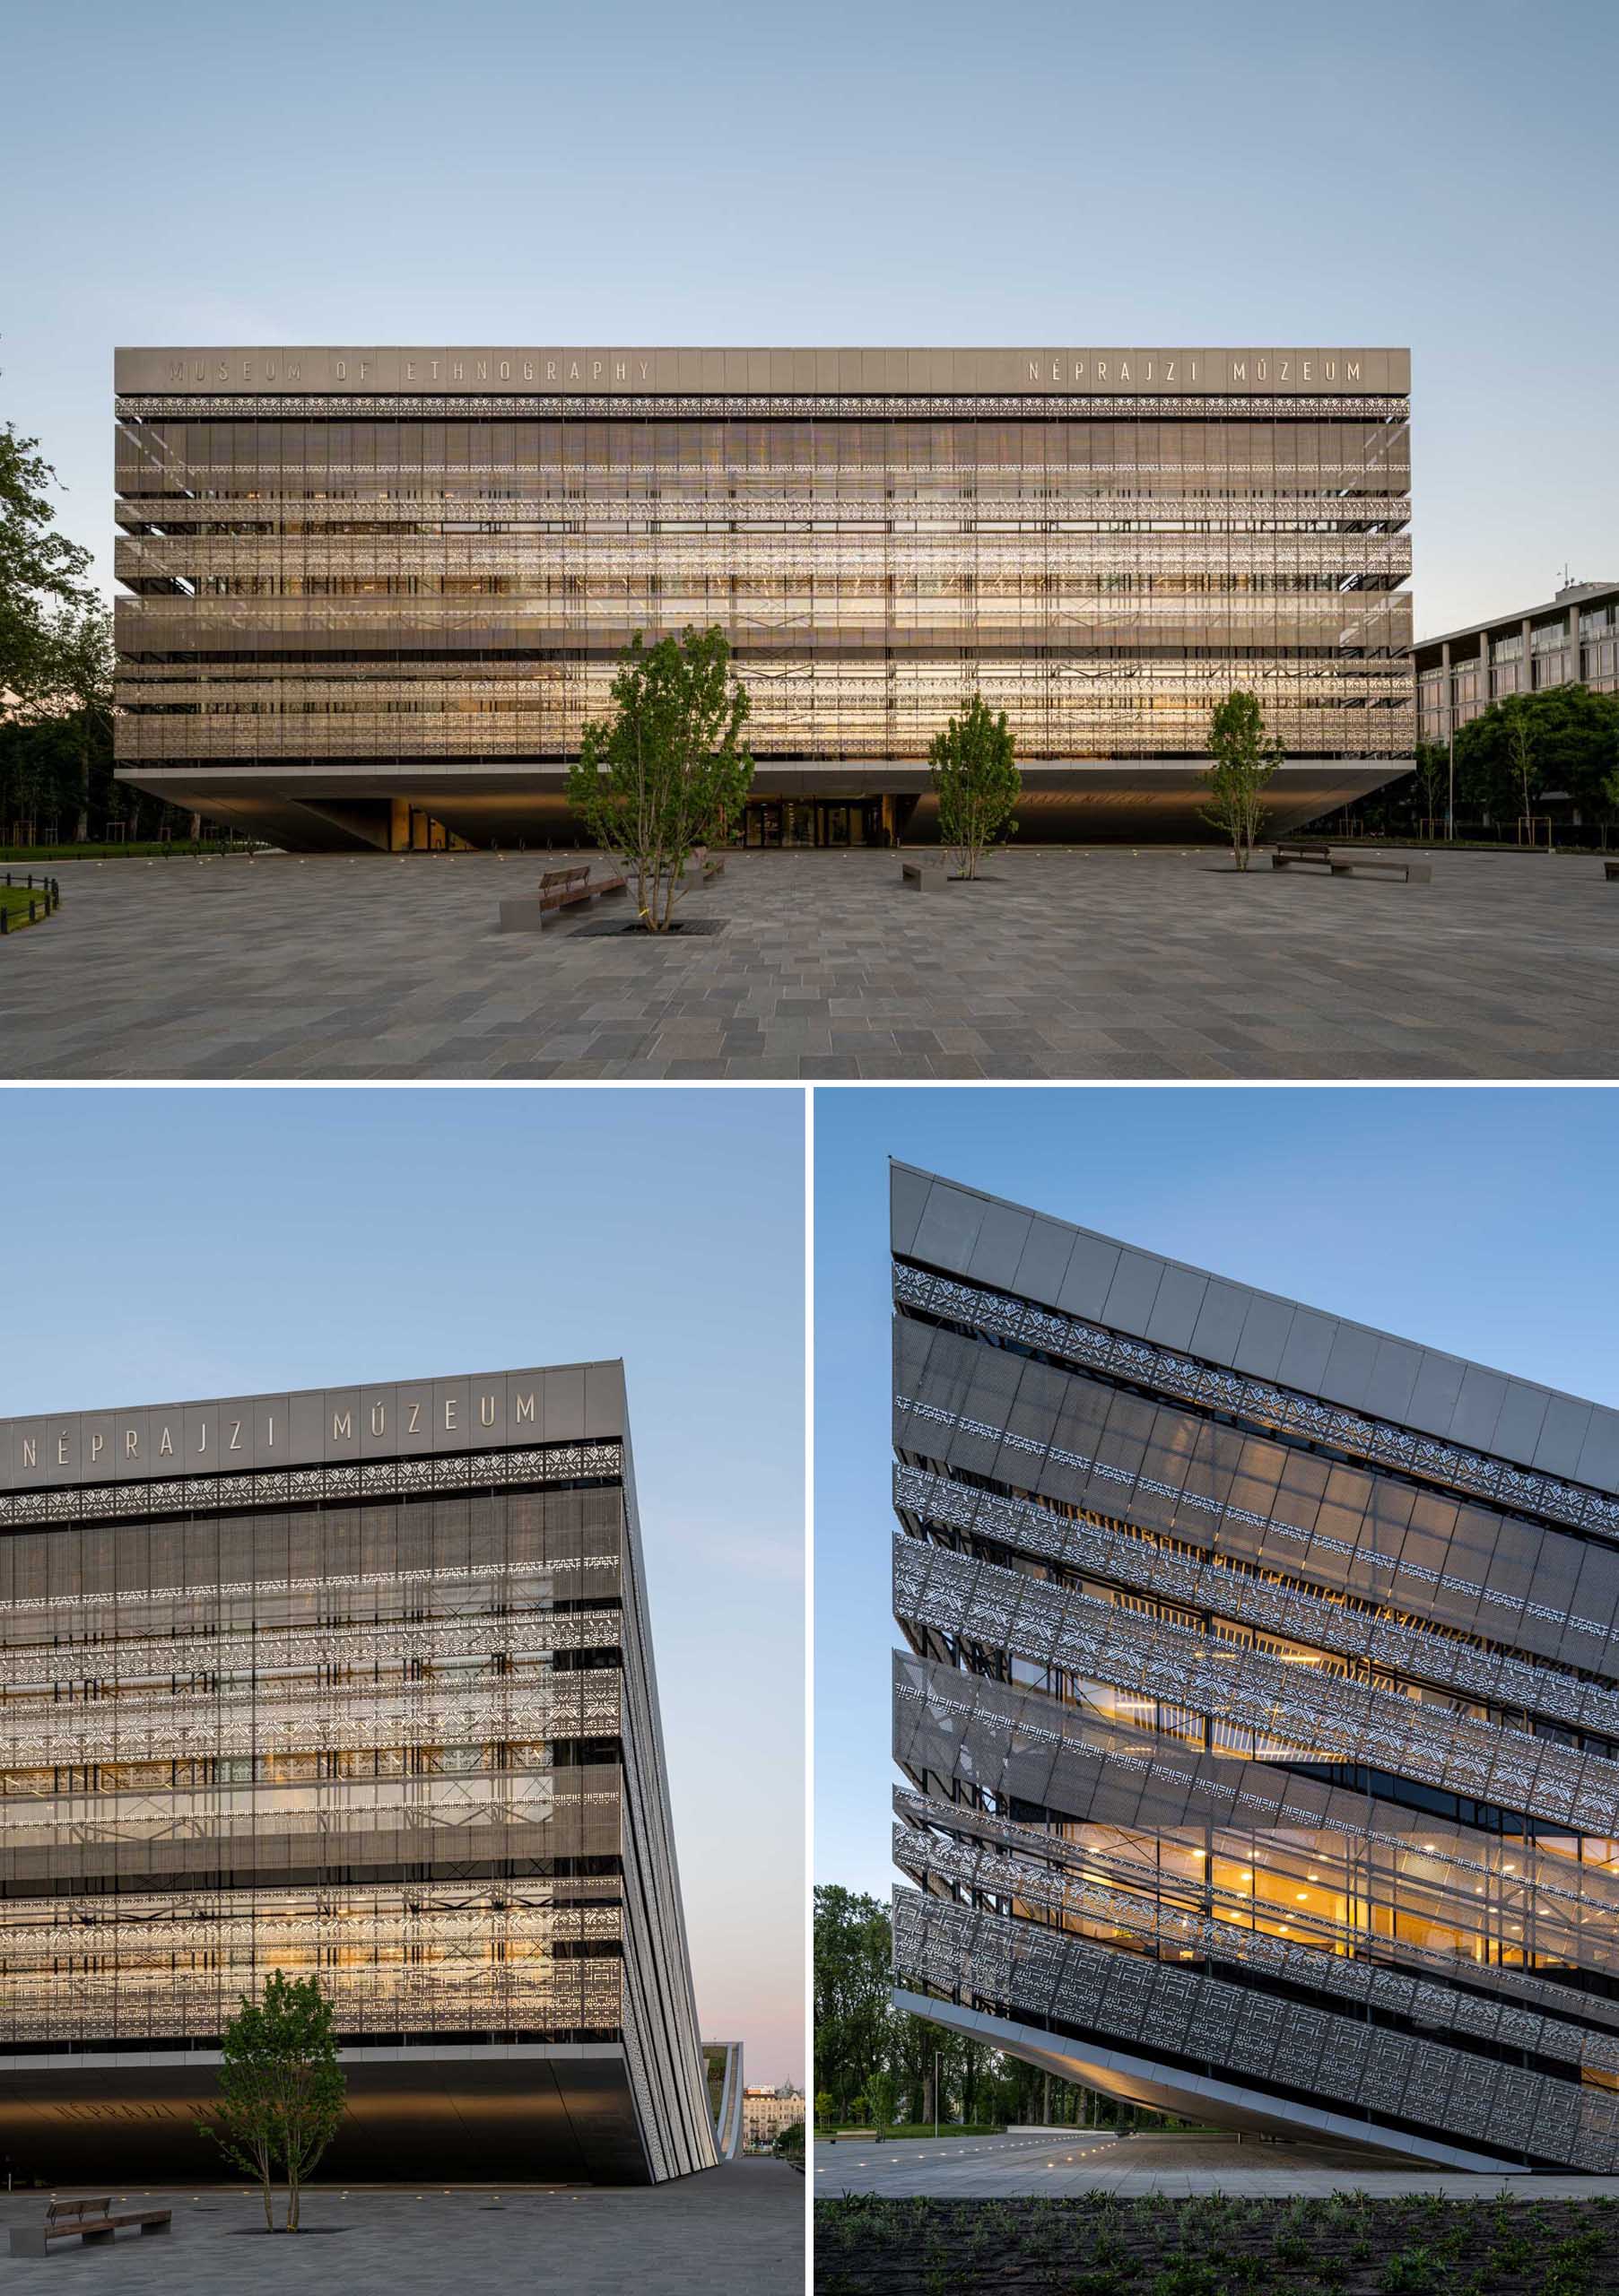 This building includes a glass facade that showcases decorative metal panels.